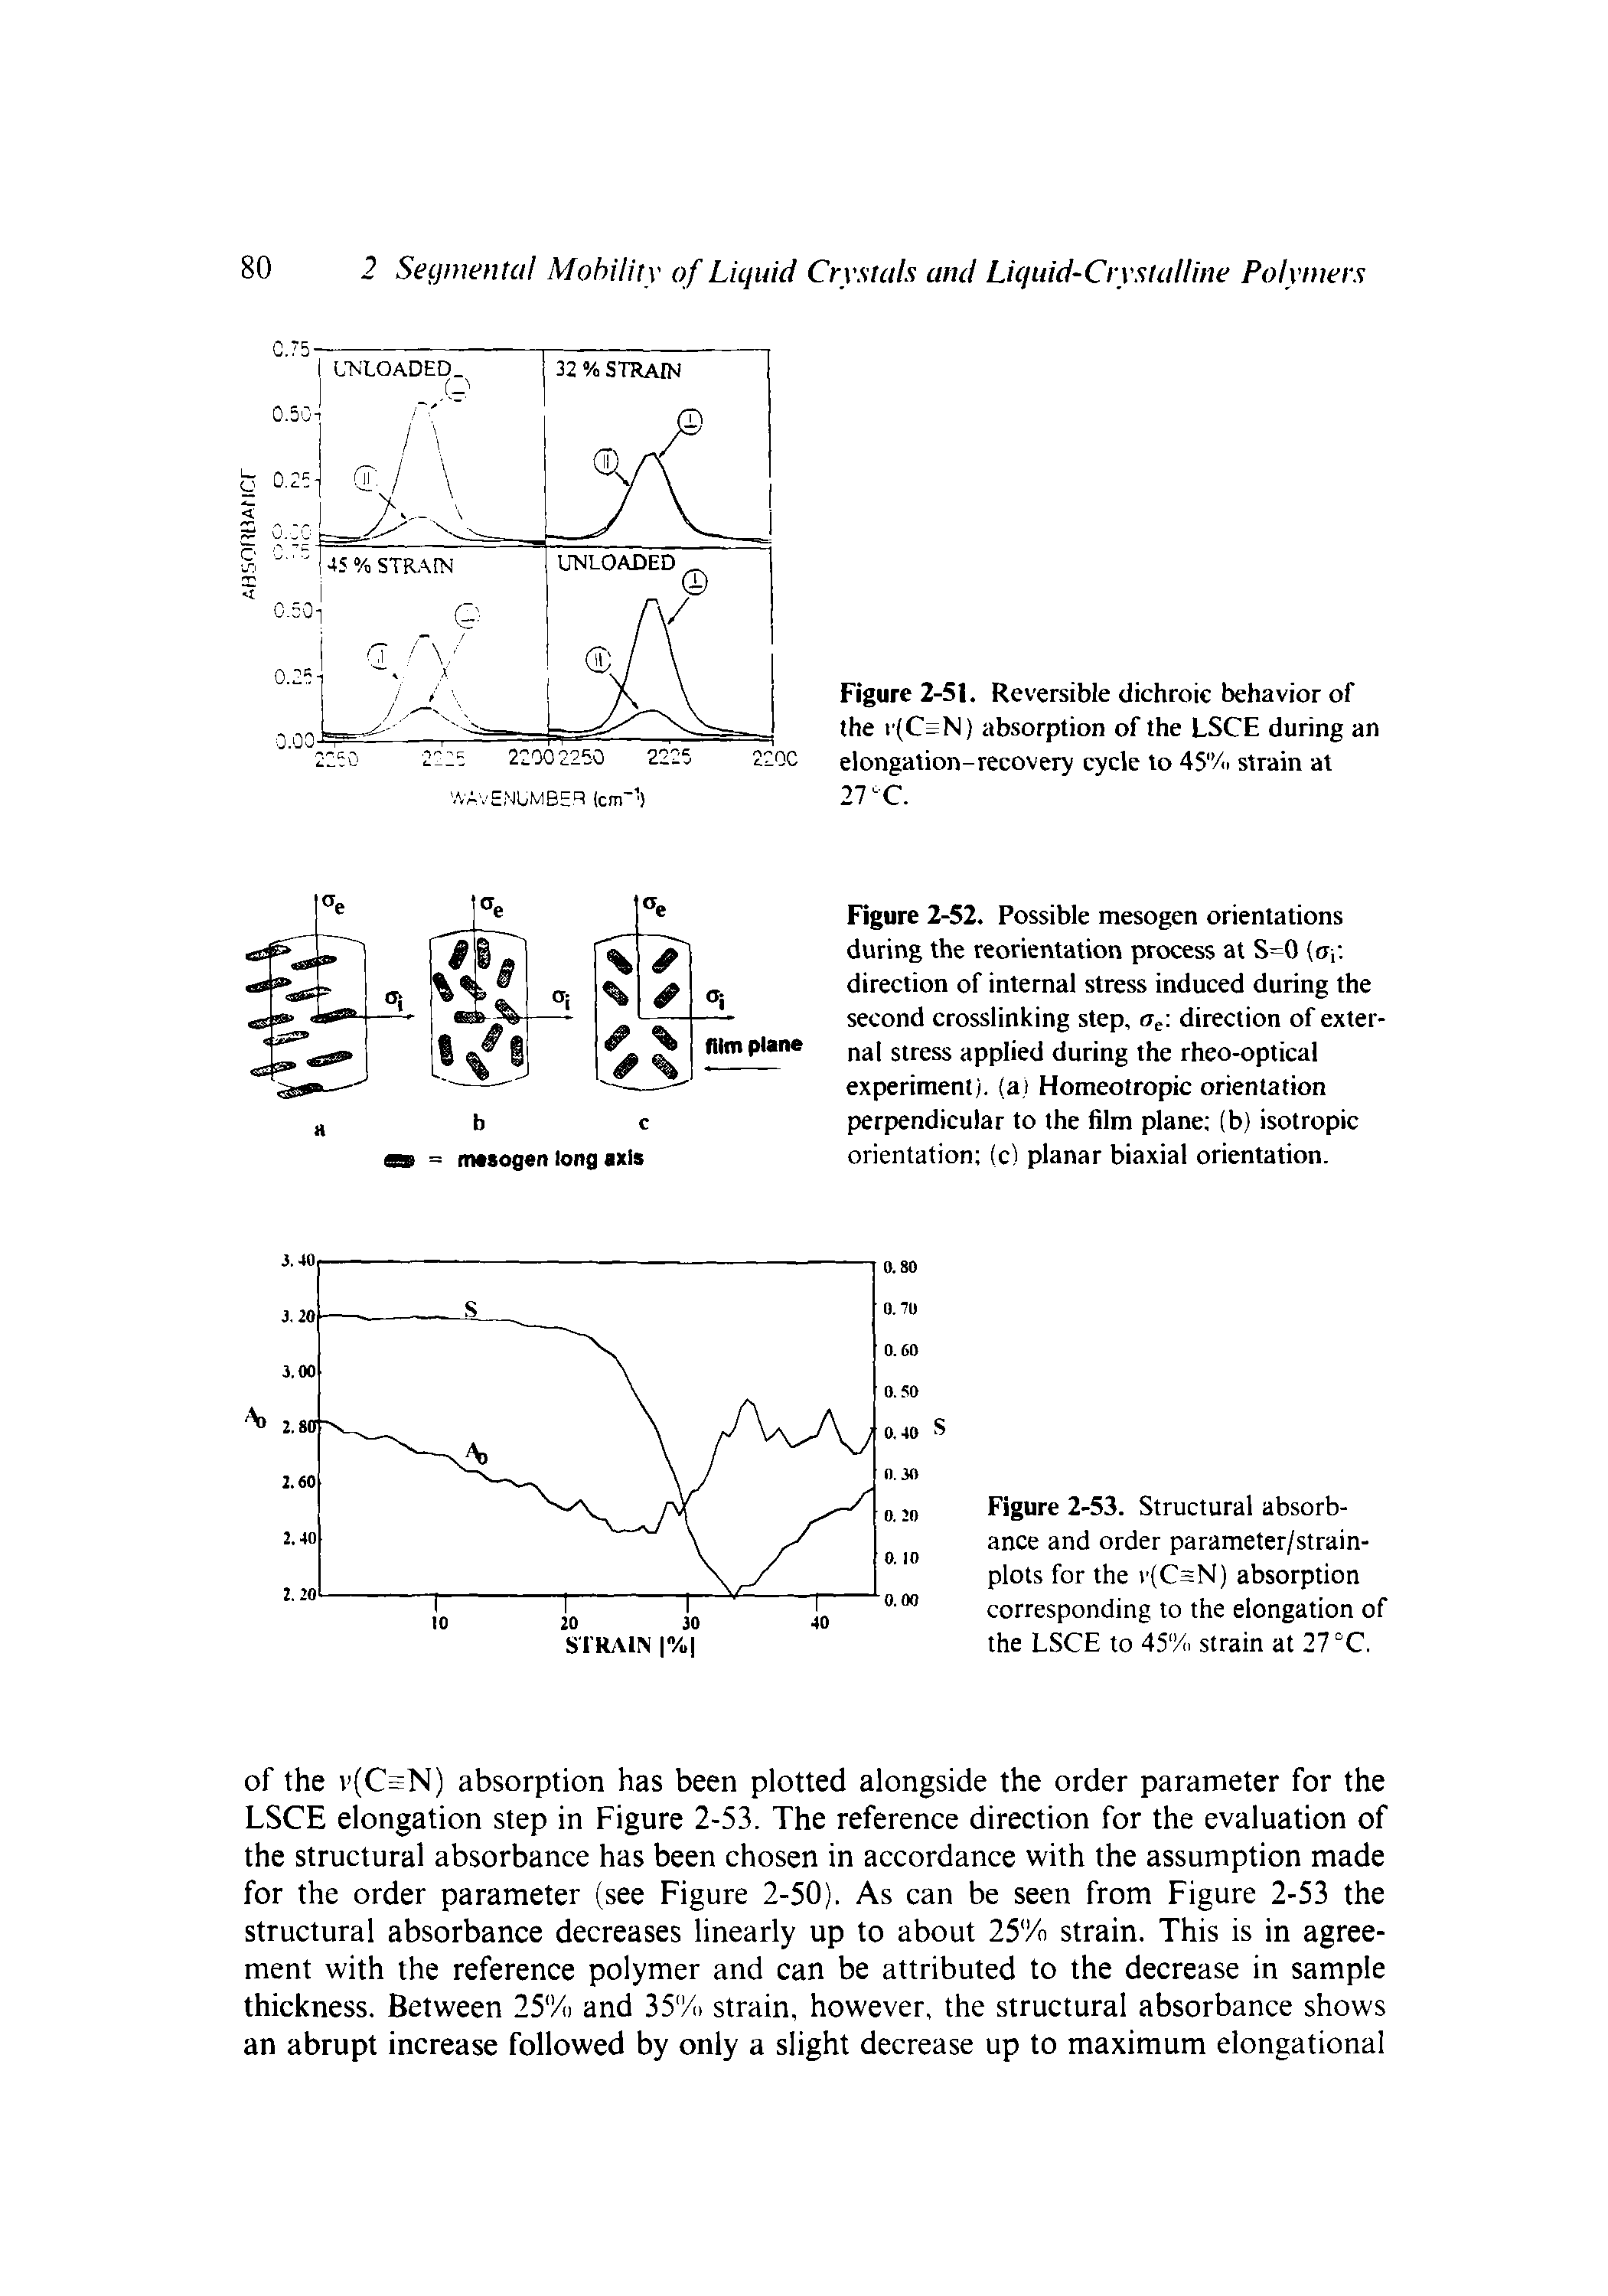 Figure 2-51. Reversible dichroic behavior of the f(C=N) absorption of the LSCE during an elongation-recovery cycle to 45"/p strain at 2T-C.